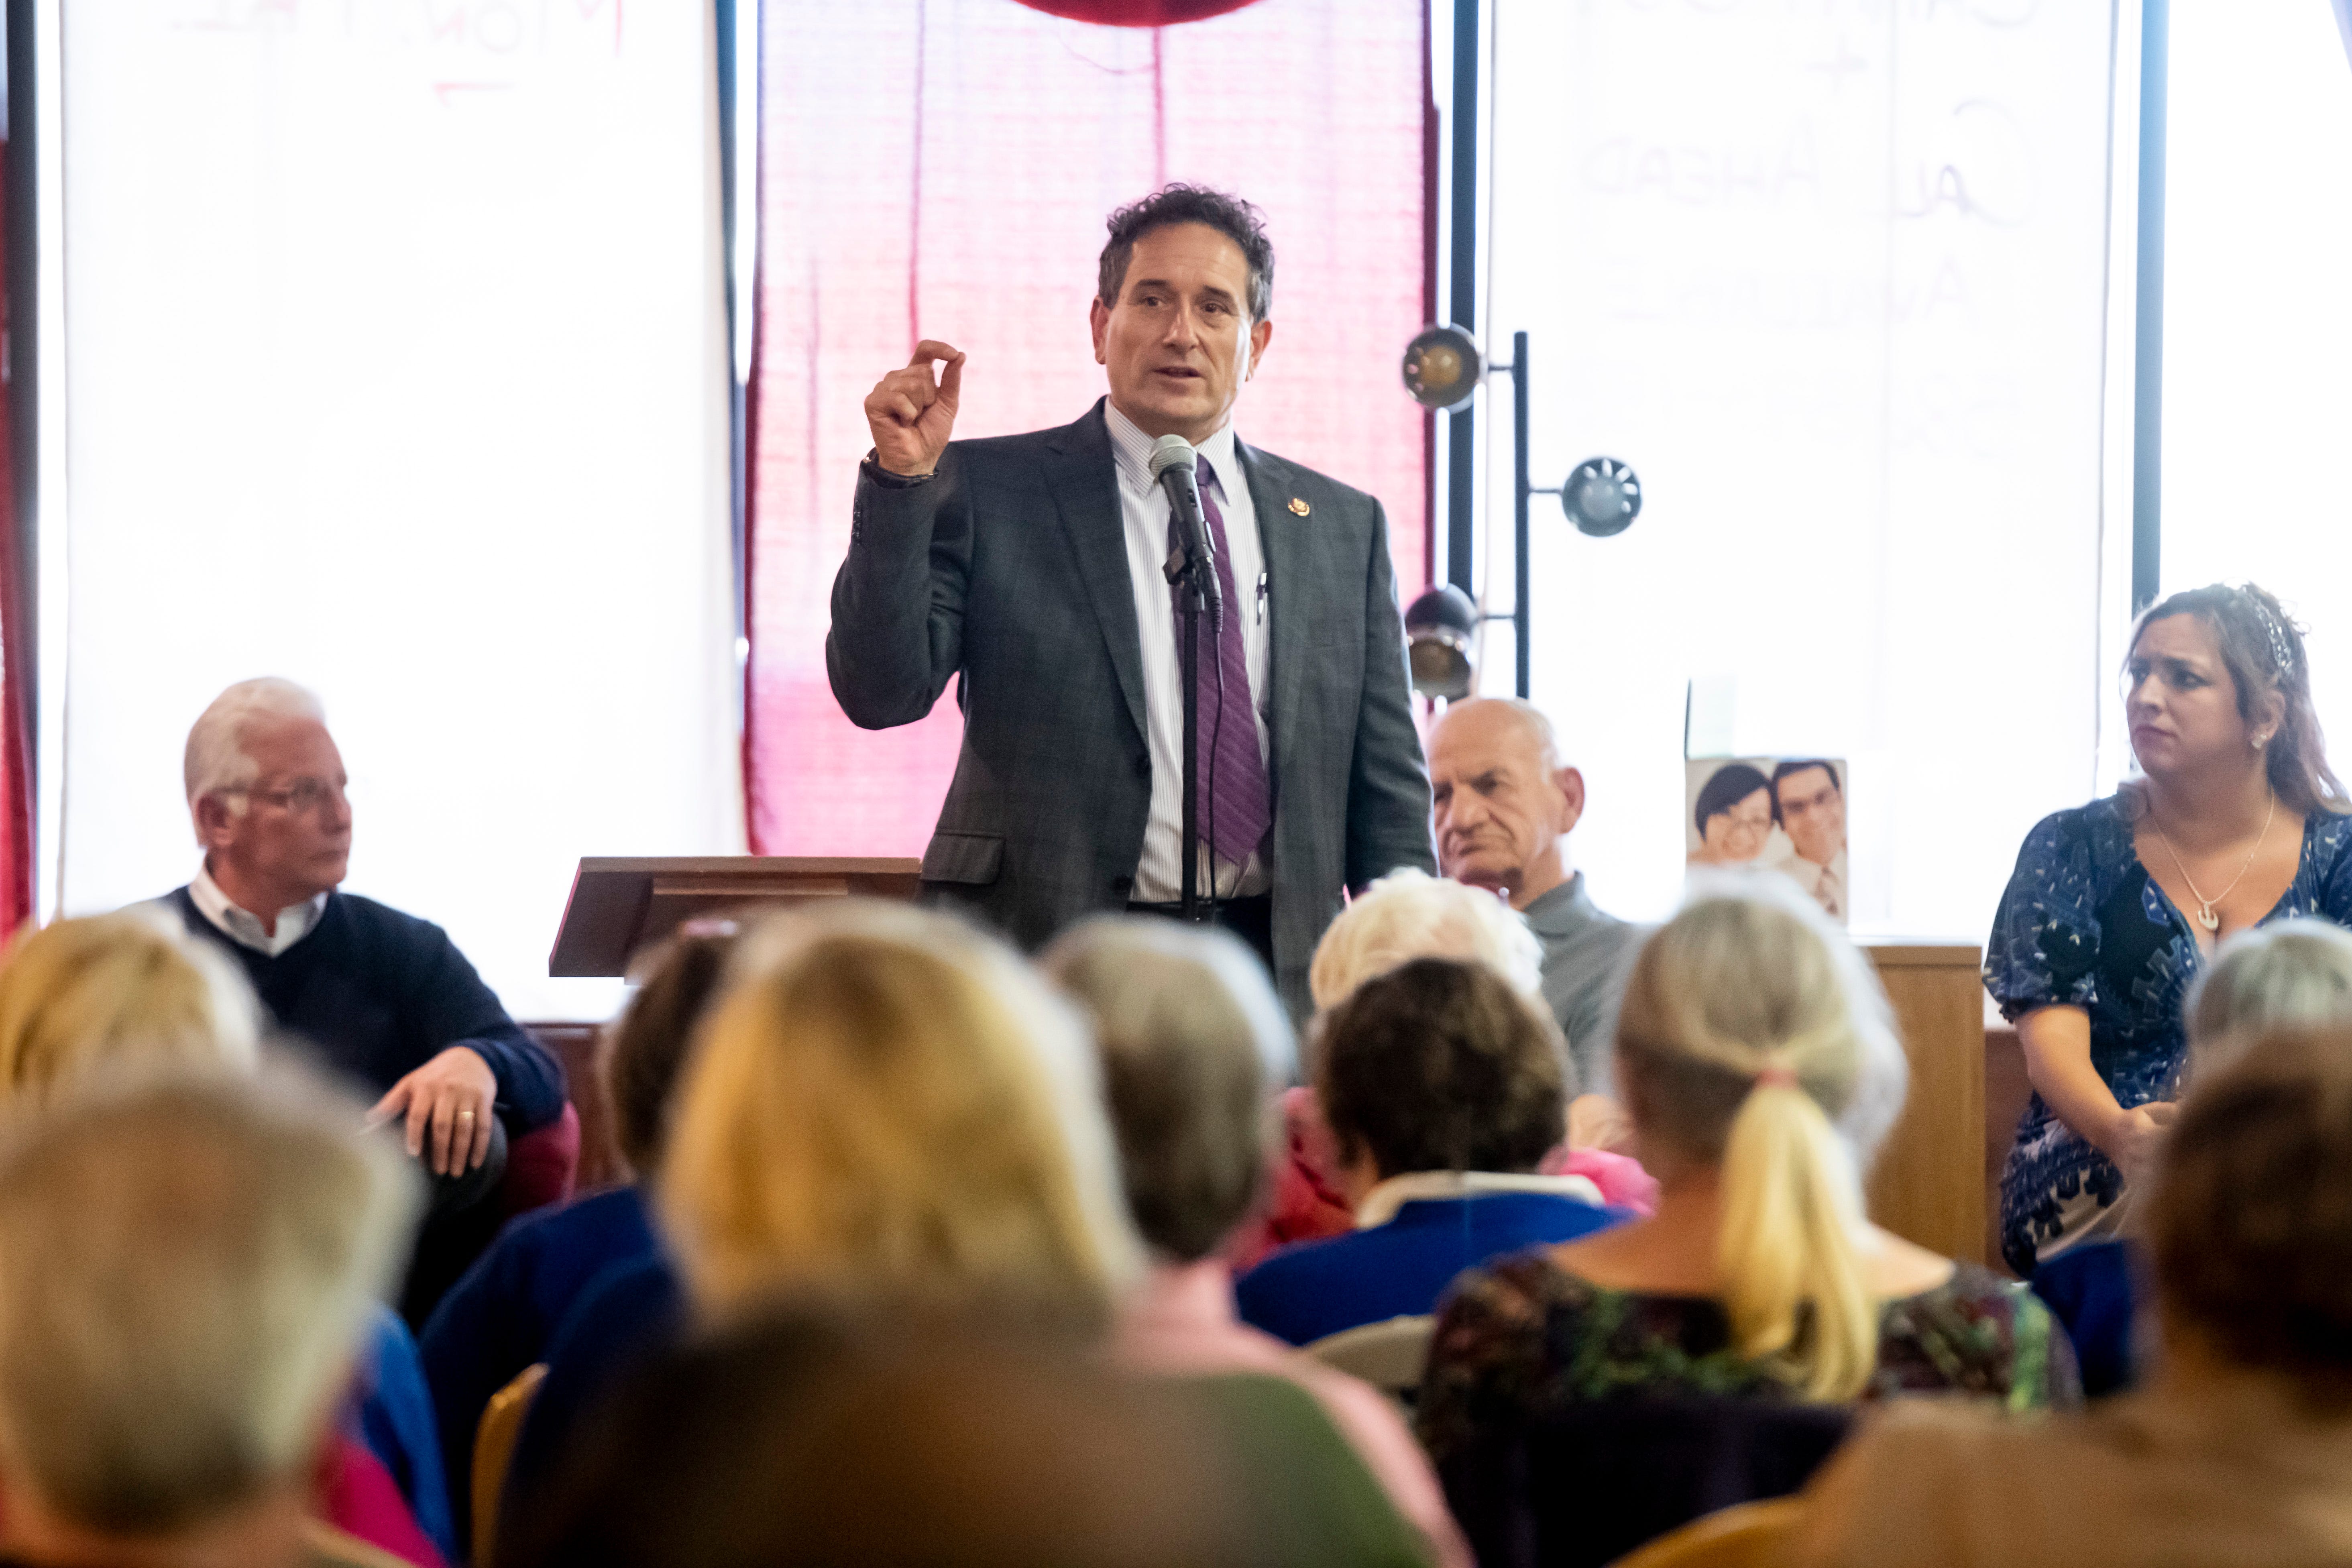 U.S. Rep. Andy Levin speaks during a community forum held by the Warren Area Democratic Club at the Hometown Heroes Coffee and More restaurant in Center Line, March 14, 2019.